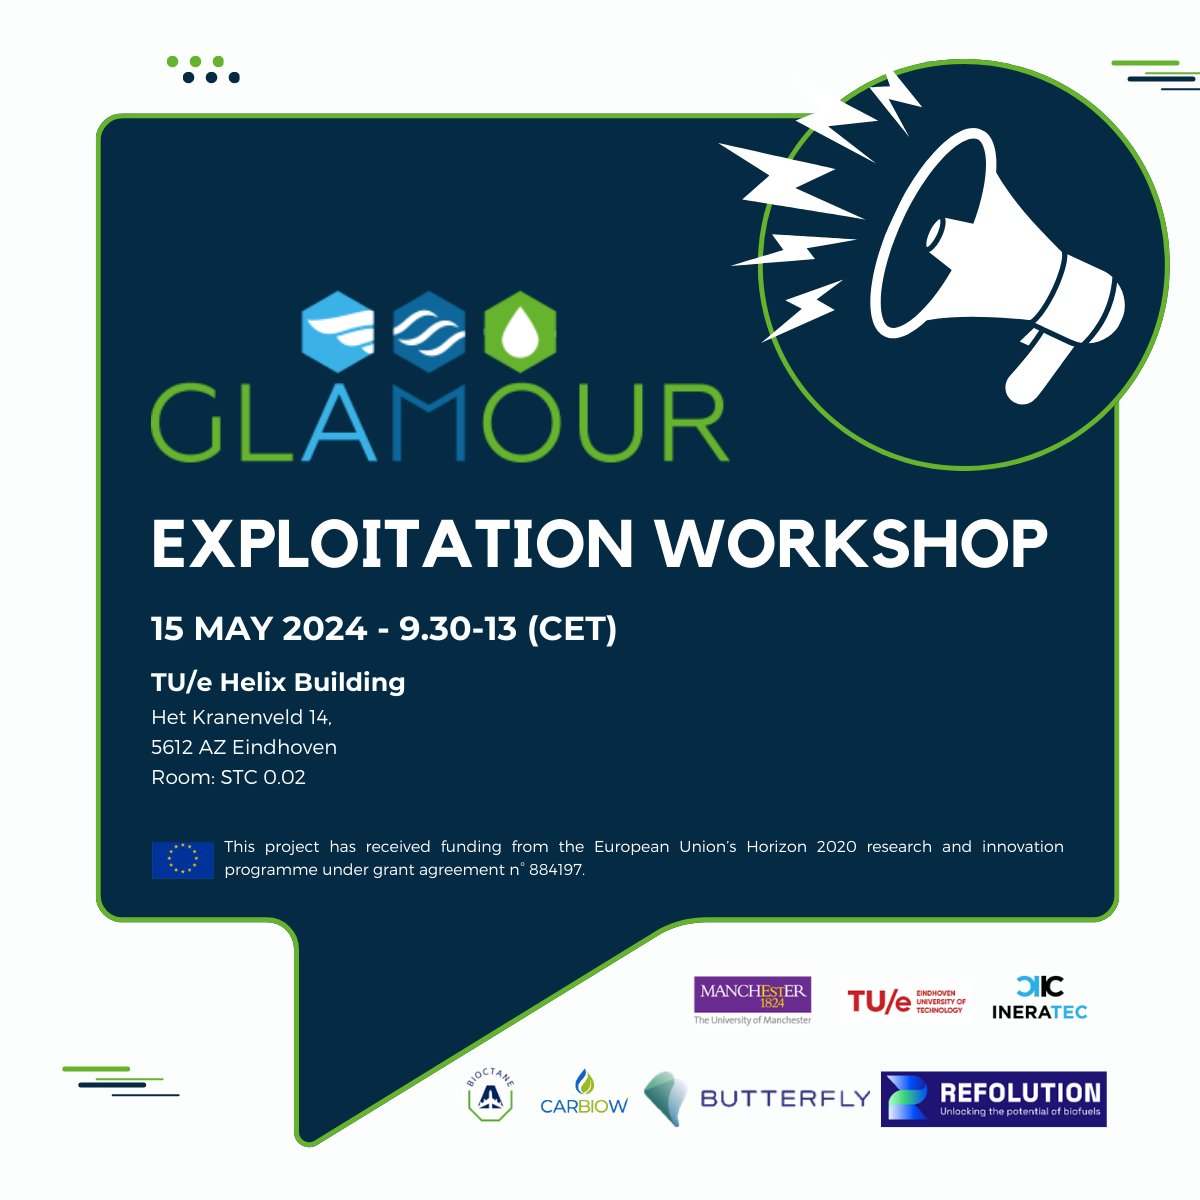 These are the last hours to register for the @GlamourH2020 Exploitation Workshop! Register and join the consortium, stakeholders and related EU project for an in-depth discussion on the latest developments towards the demostration of advanced #biofuels 🔗 lnkd.in/dRVshFpY